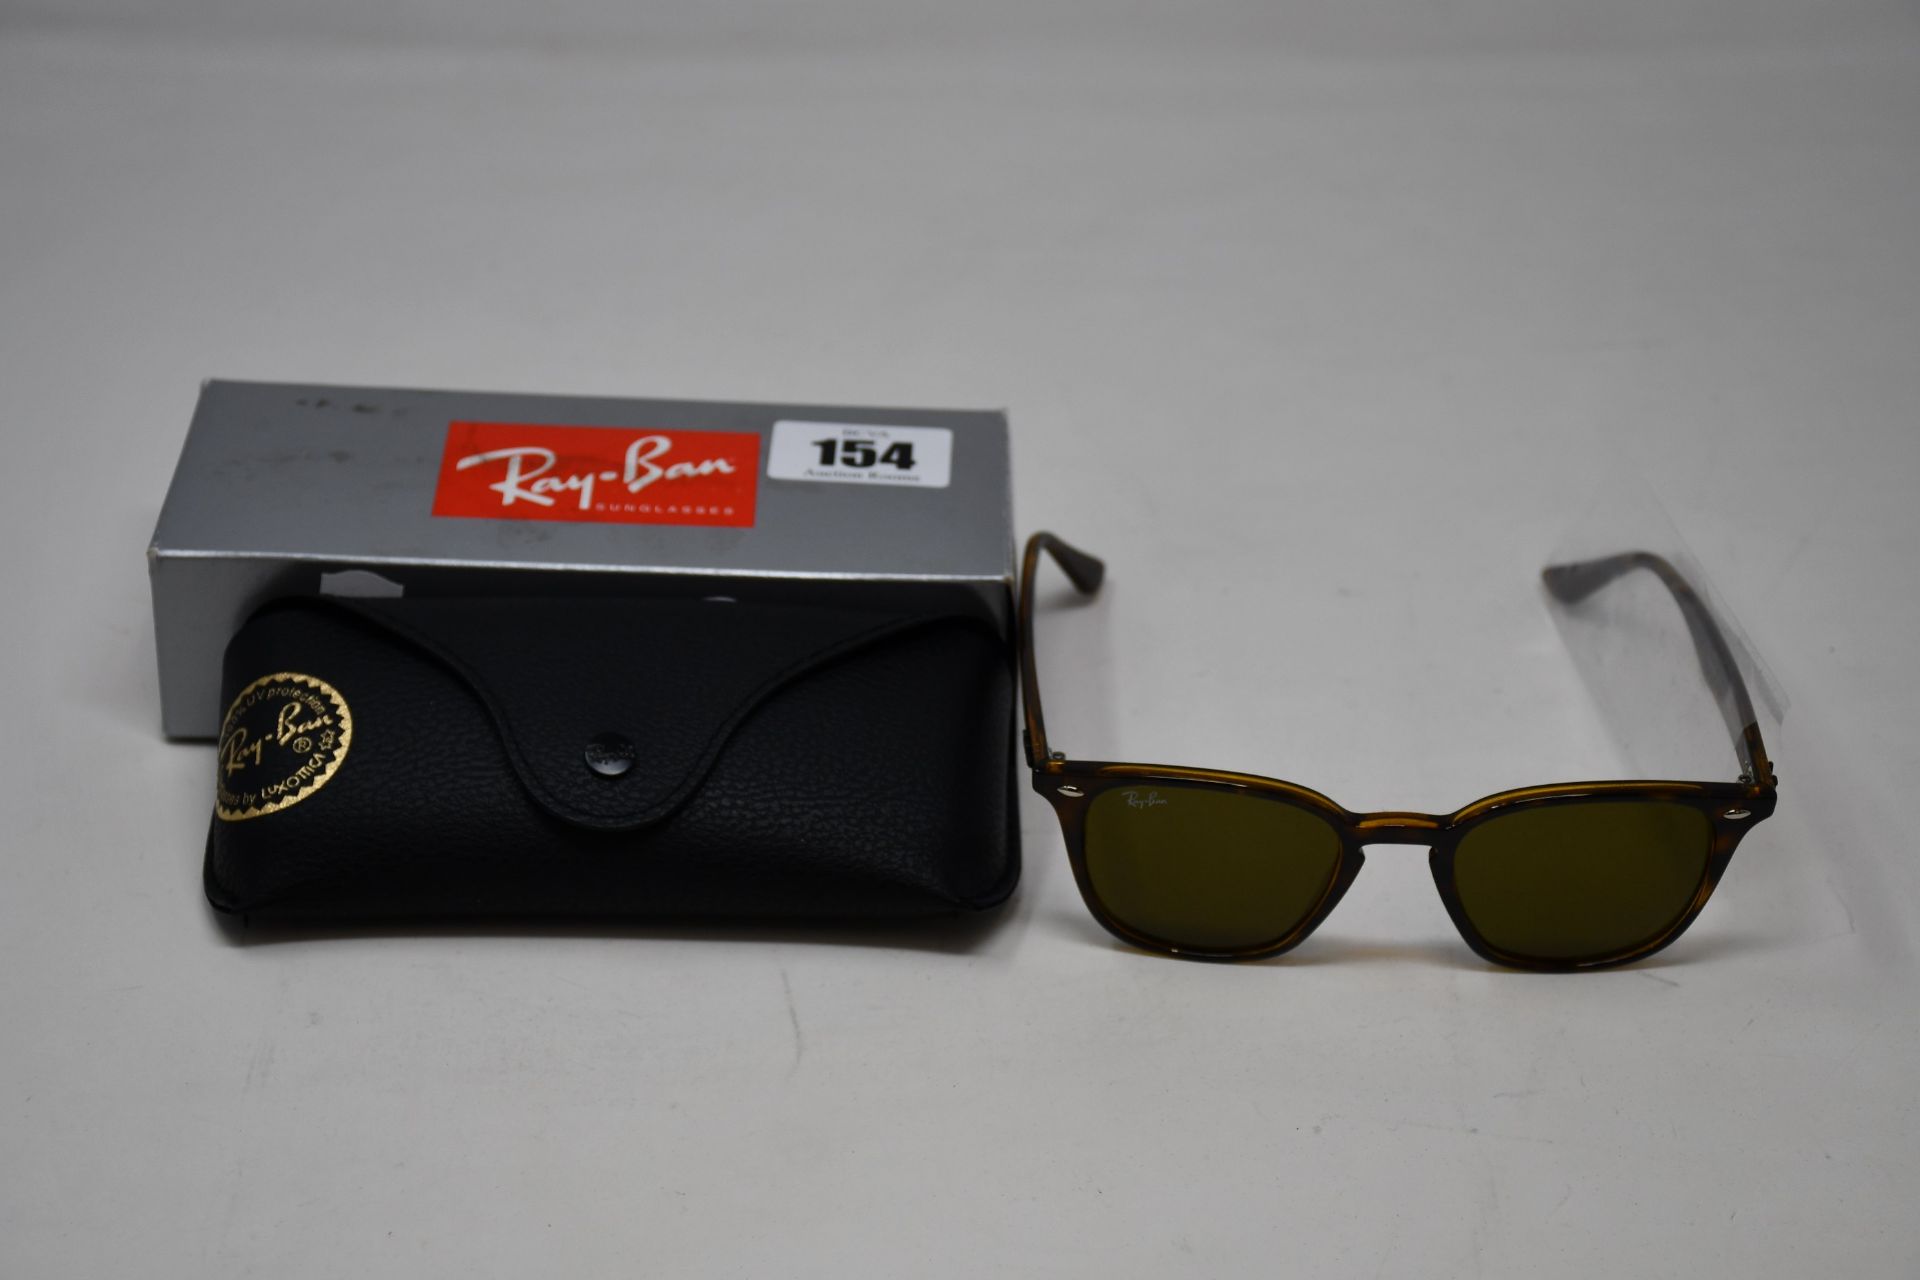 A pair of as new Ray Ban RB4258 sunglasses.